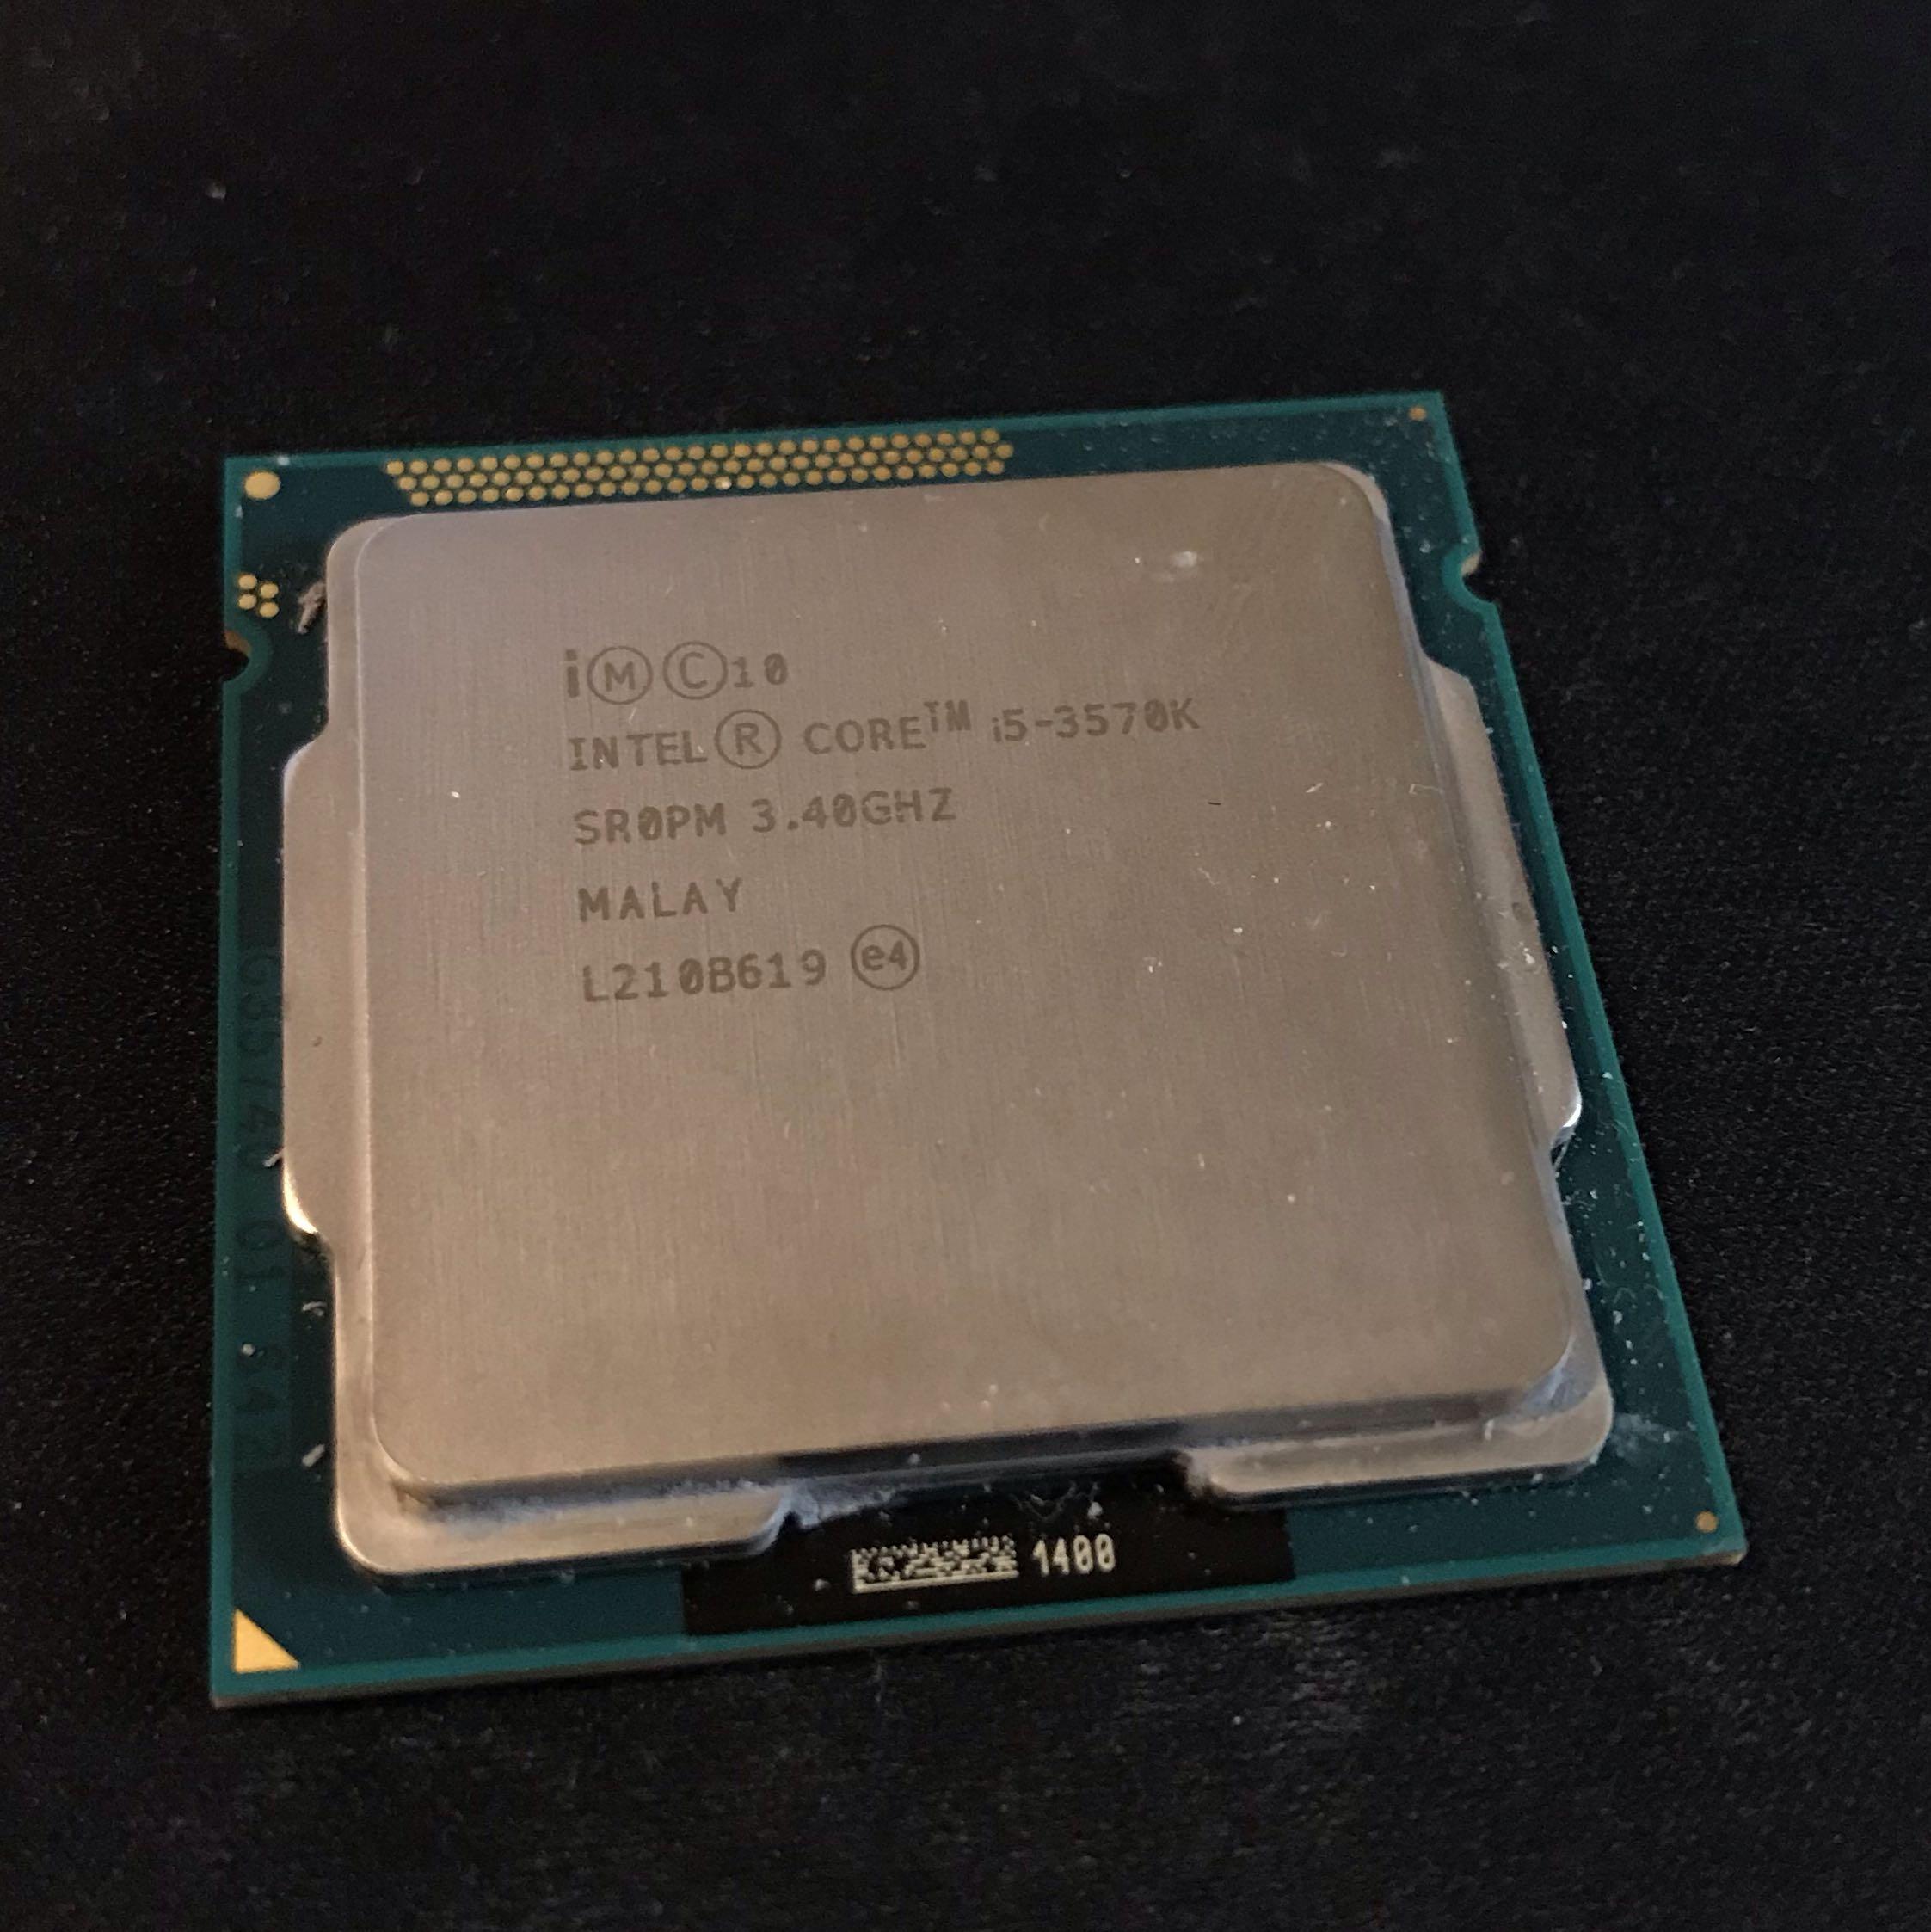 Intel Core i5-3570K 3.4Ghz, Computers & Tech, Parts & Computer Parts on Carousell